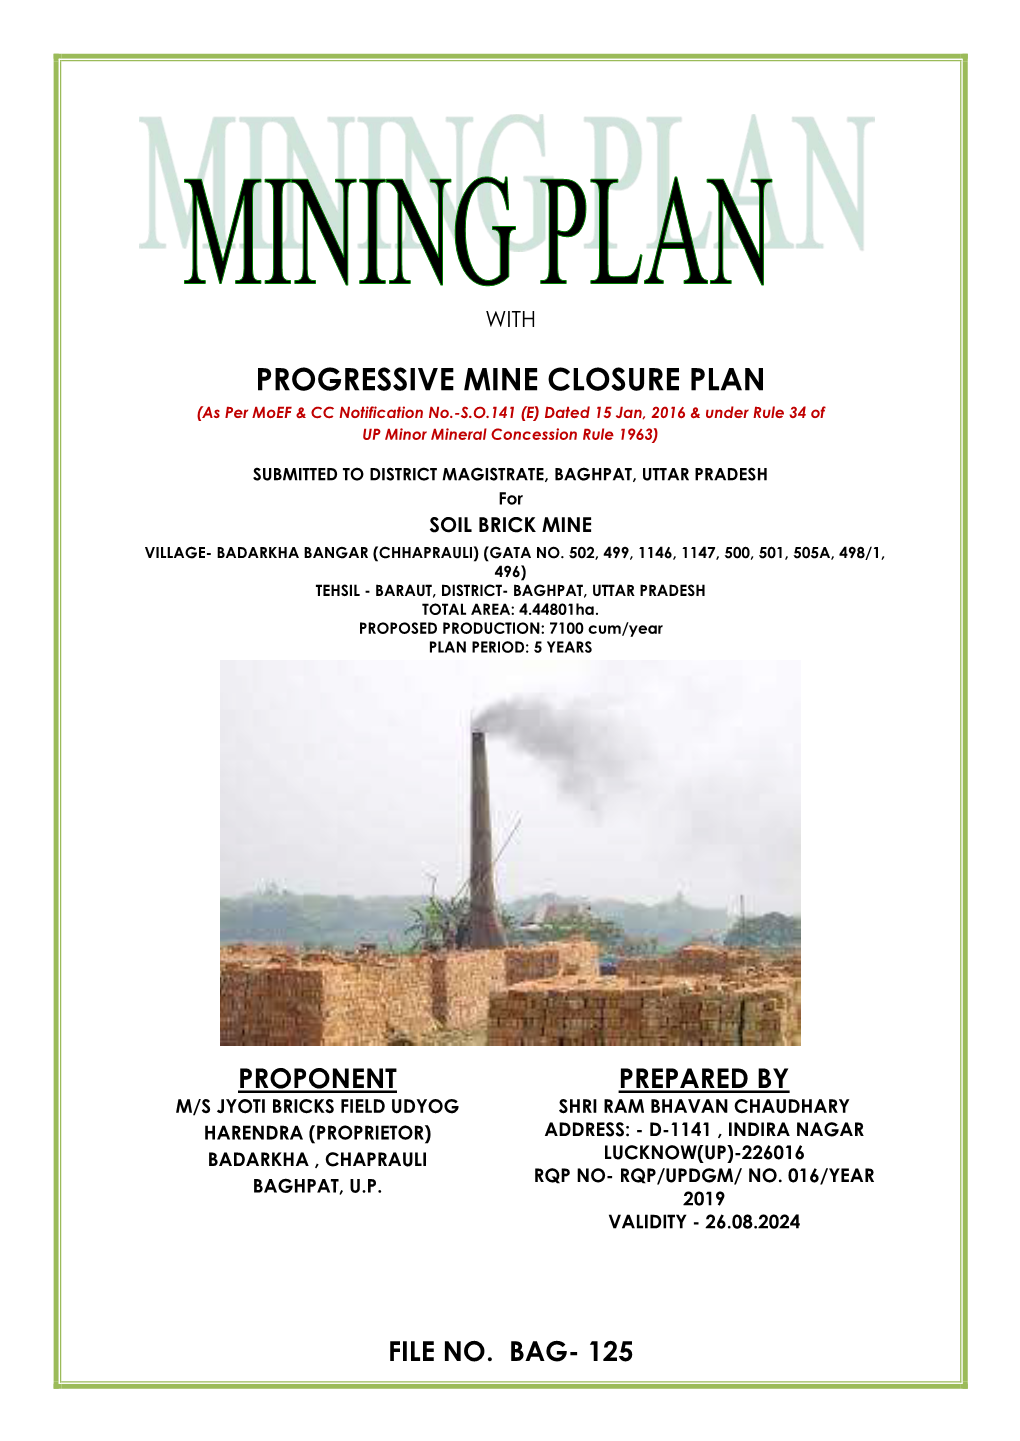 PROGRESSIVE MINE CLOSURE PLAN (As Per Moef & CC Notification No.-S.O.141 (E) Dated 15 Jan, 2016 & Under Rule 34 of up Minor Mineral Concession Rule 1963)